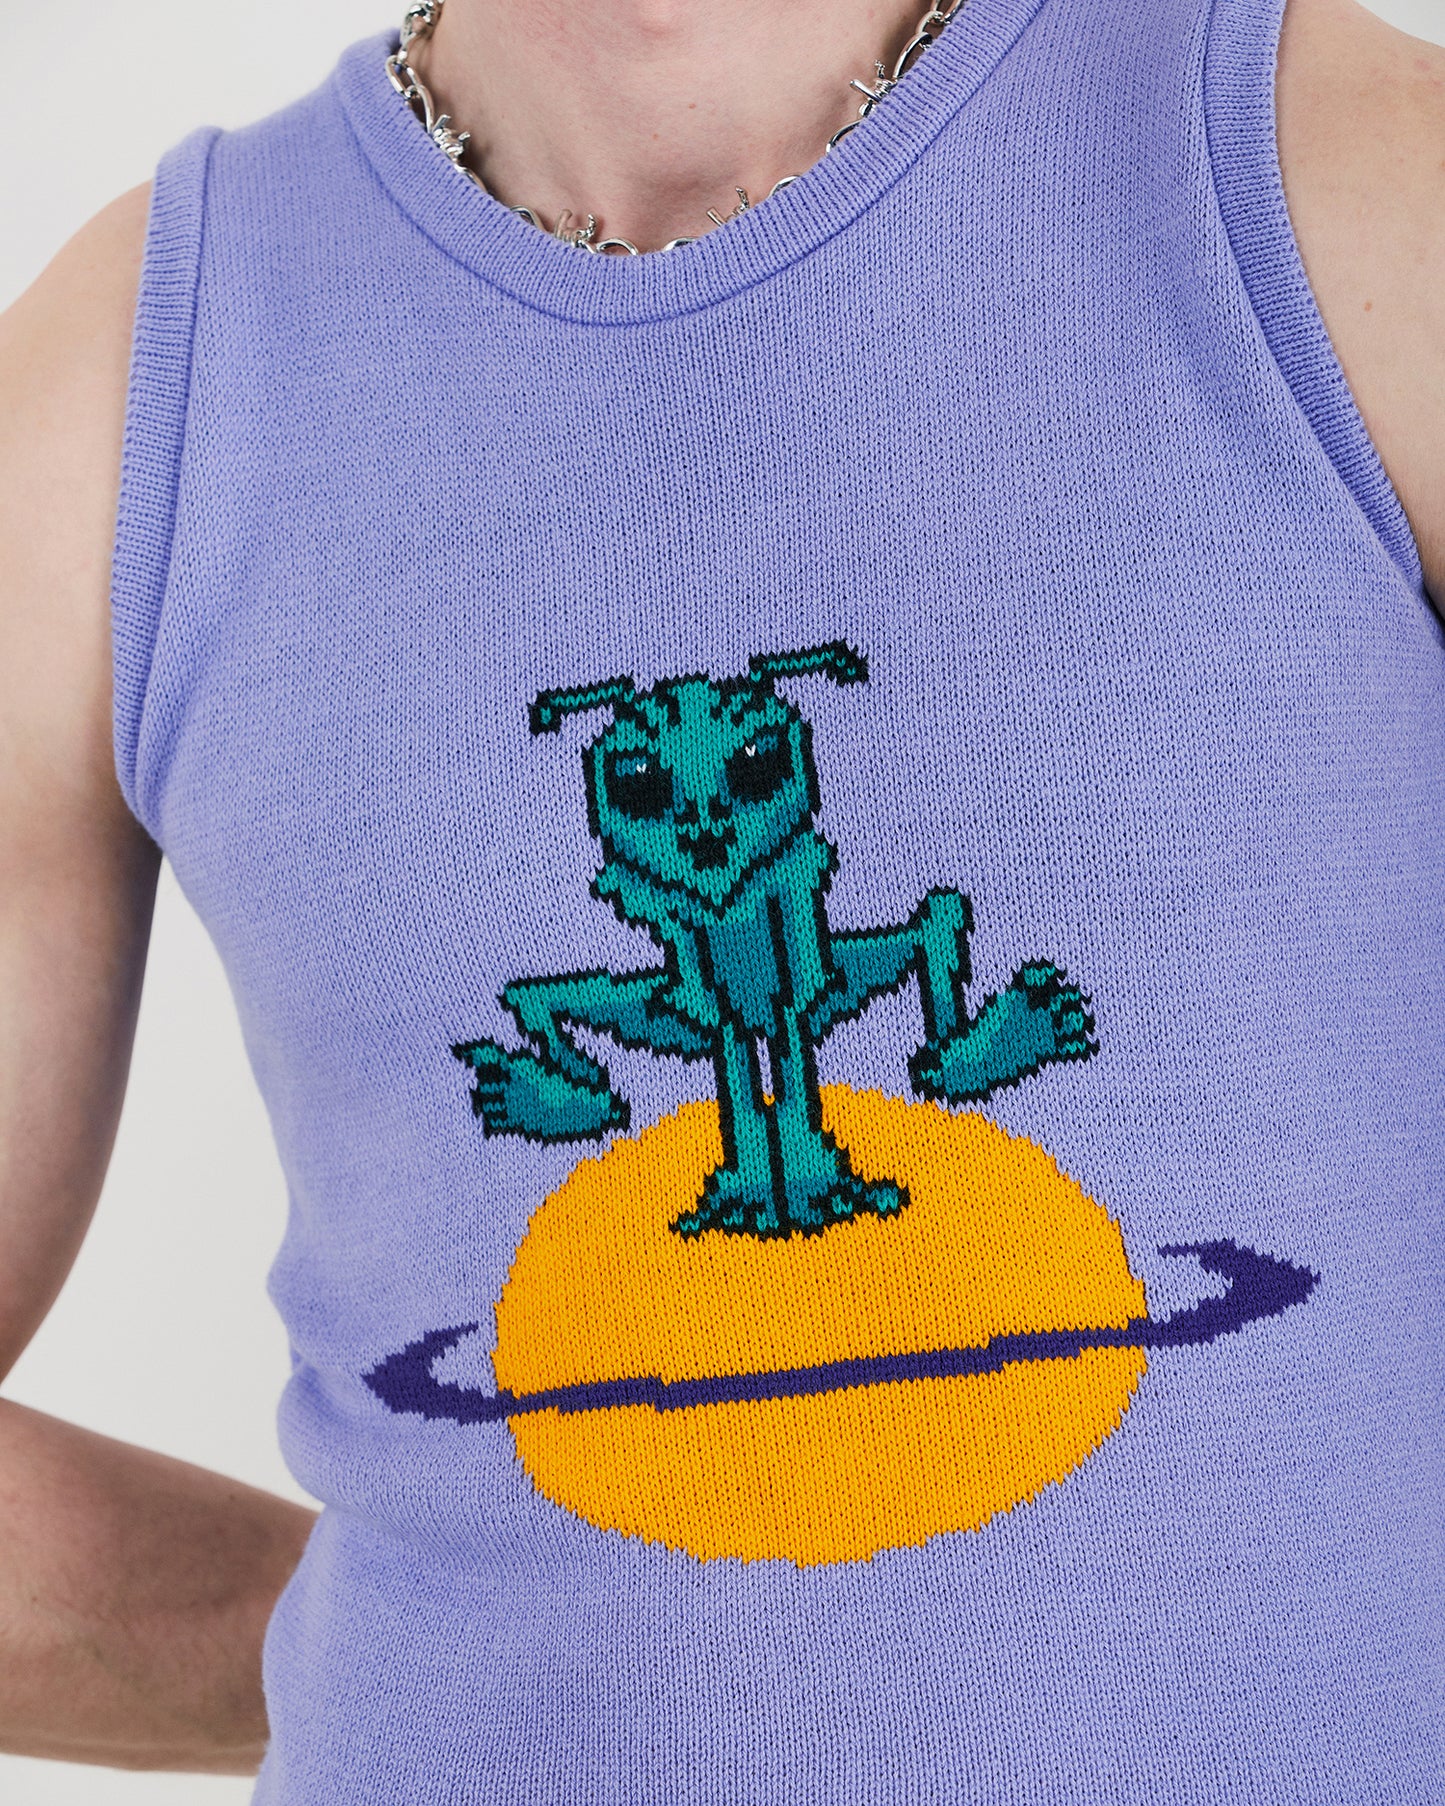 Different Dimension Tank Top - Bad Handwriting